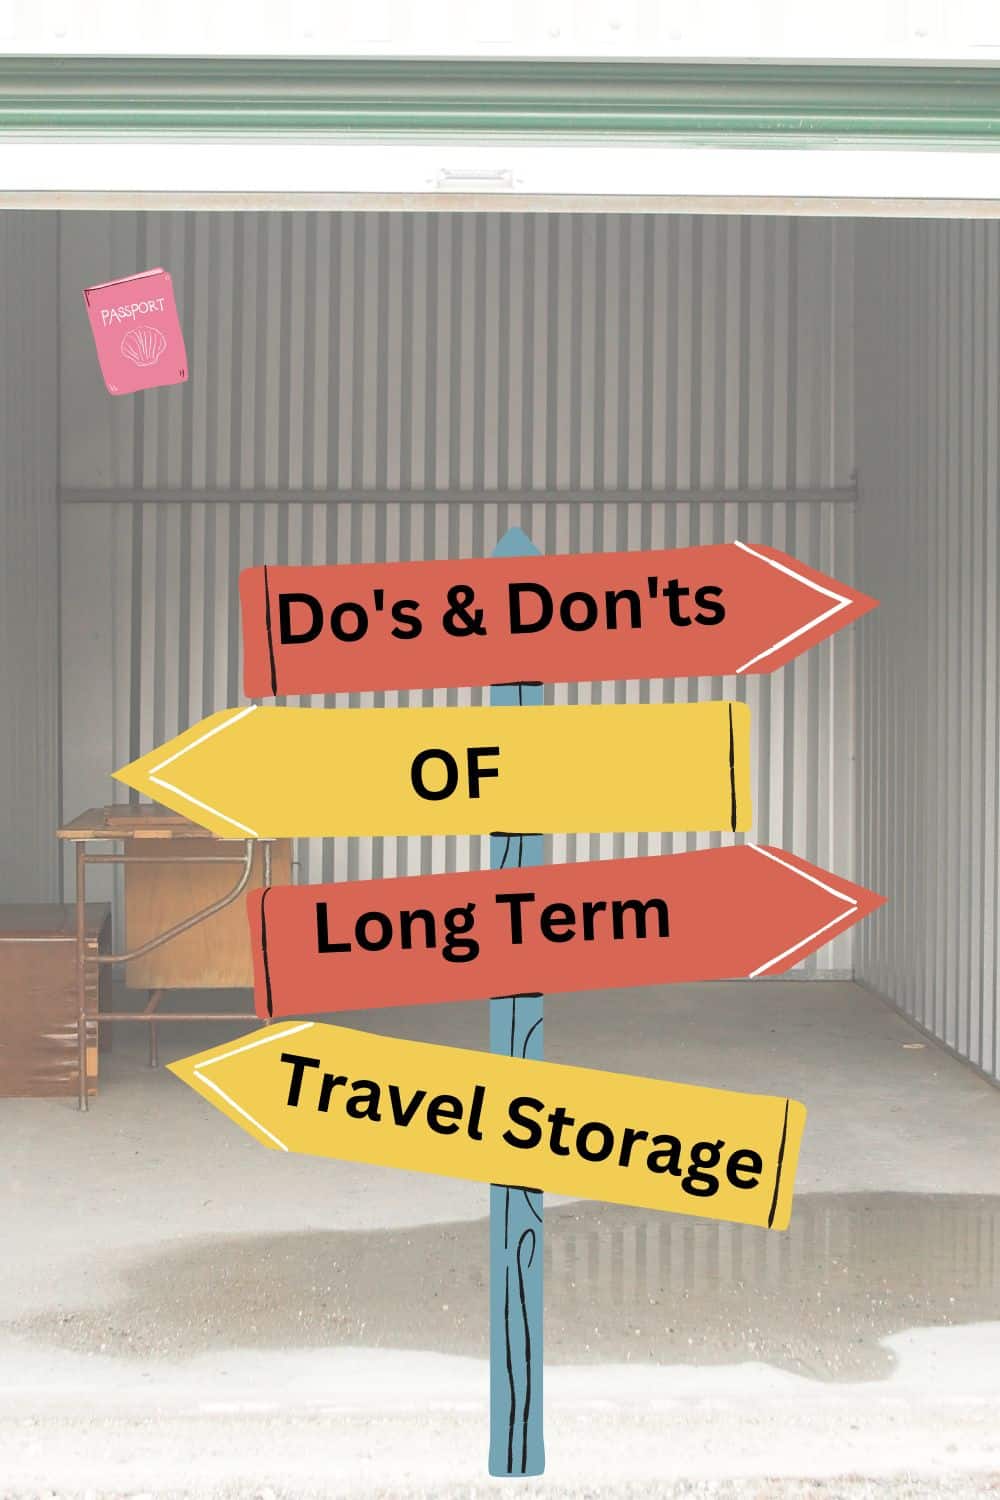 Do's and don'ts of long term travel storage 